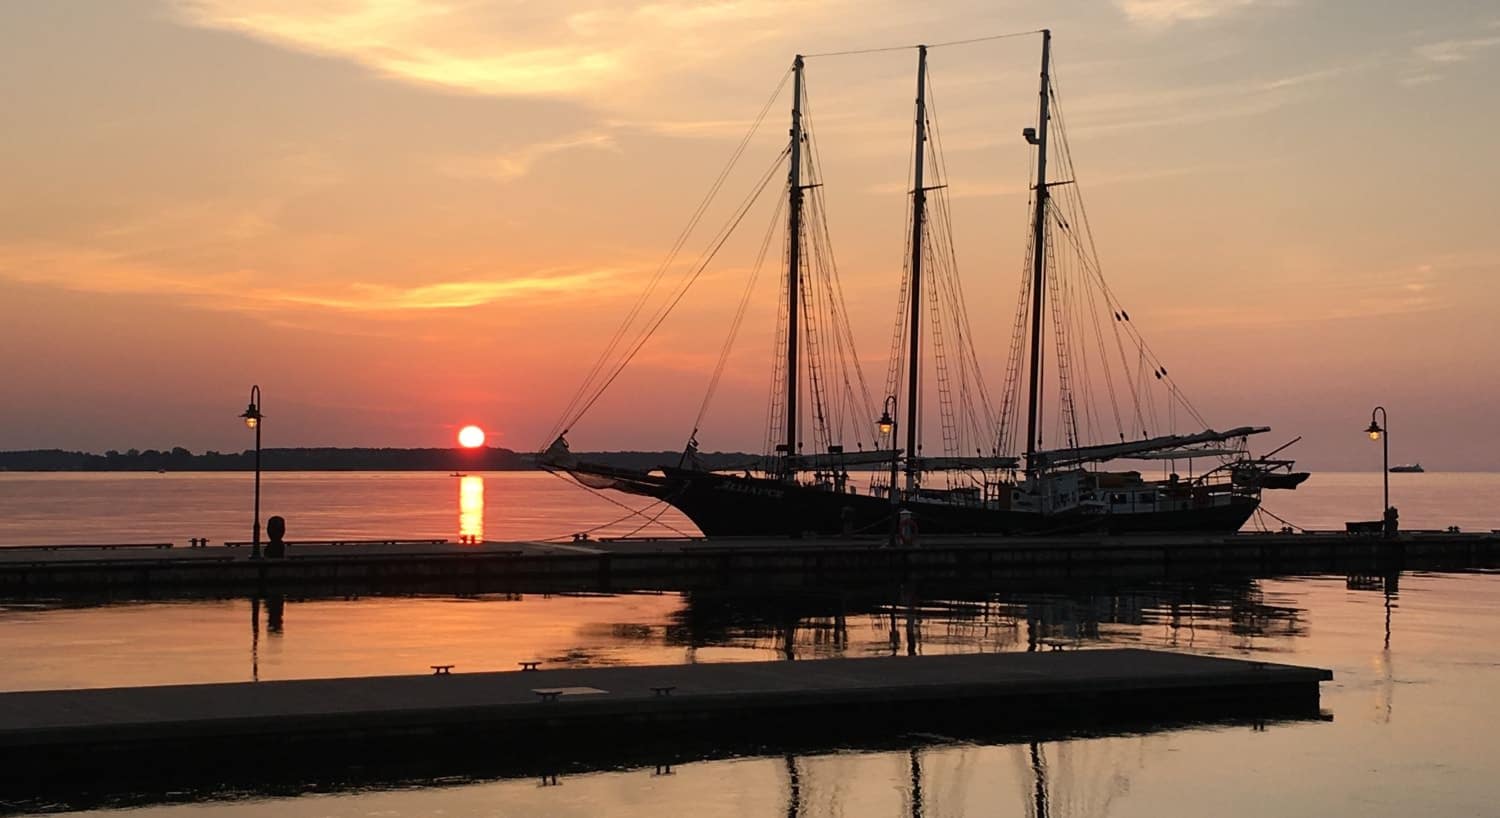 Large sailboat tied to a dock with the setting sun in the background